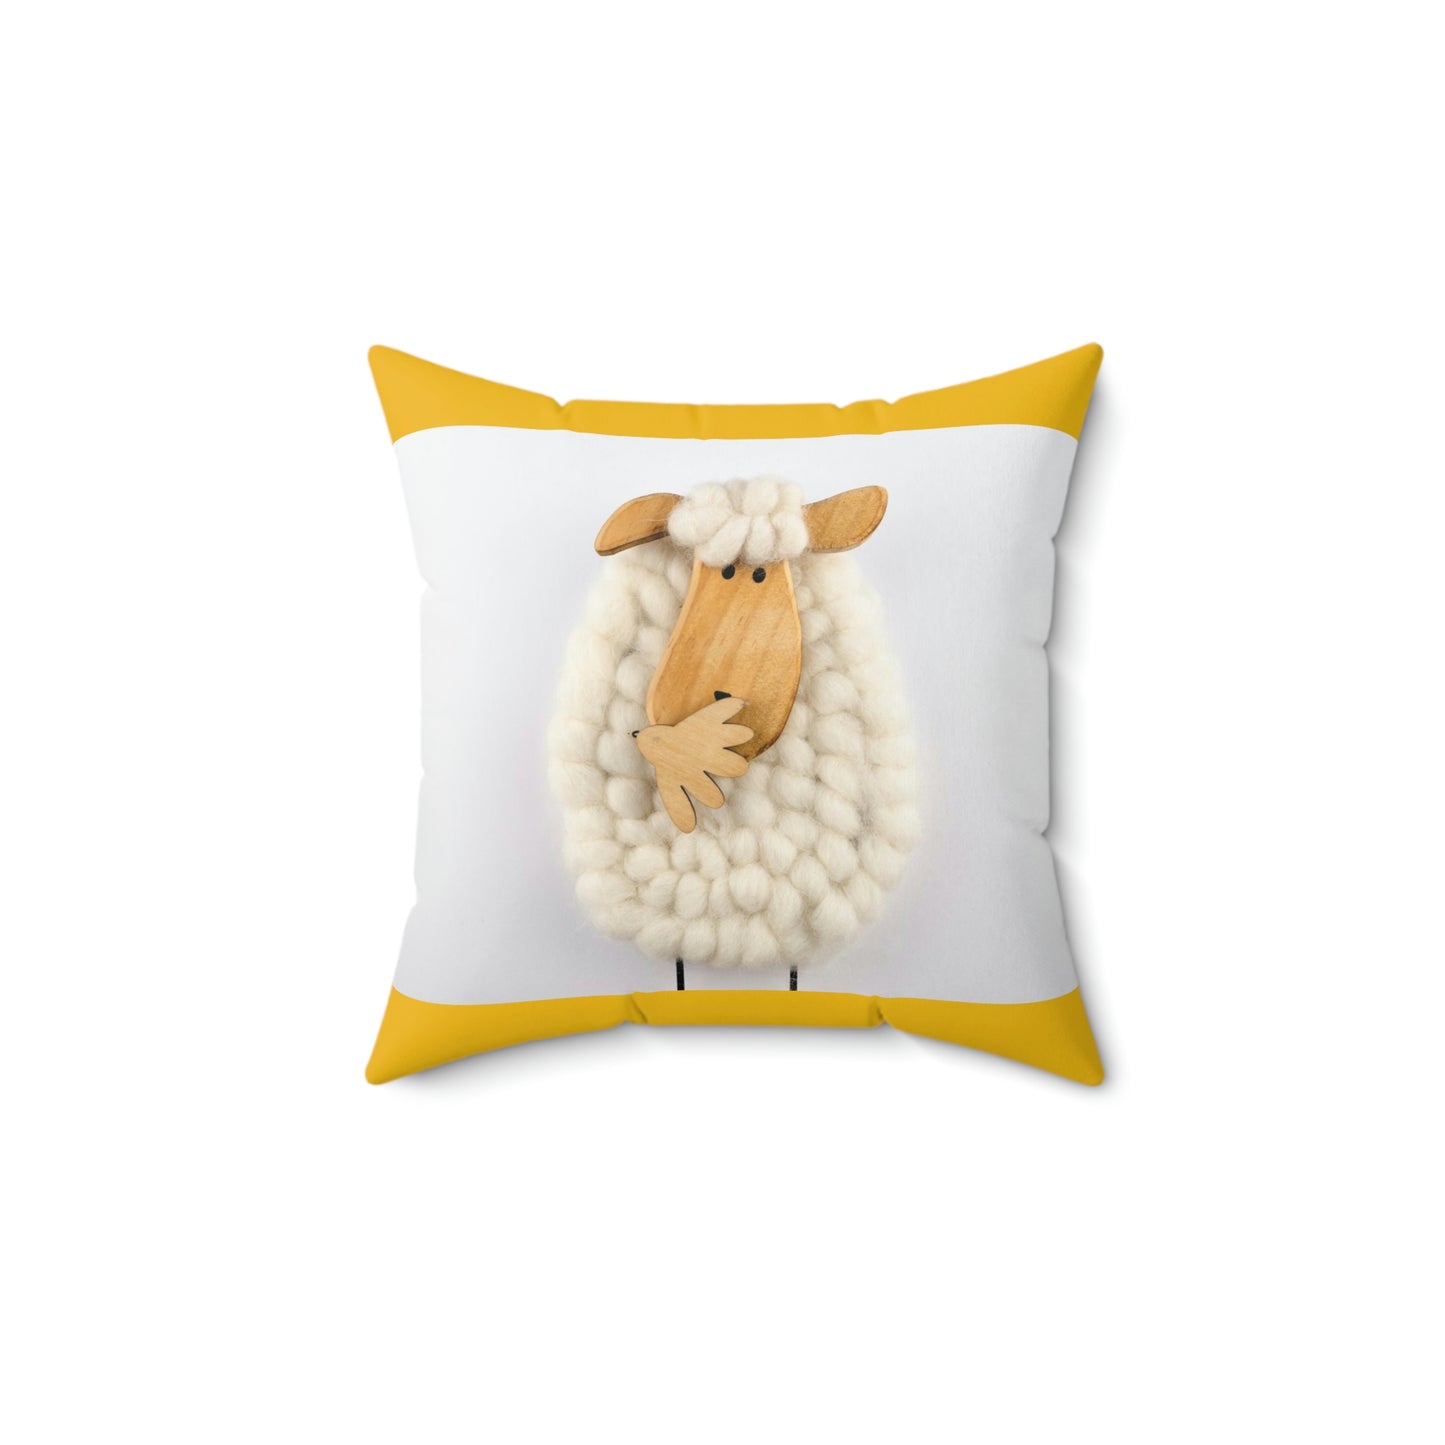 Sheep Pillow Case - Bright Yellow and White Colors - Faux Suede Square Pillow Case